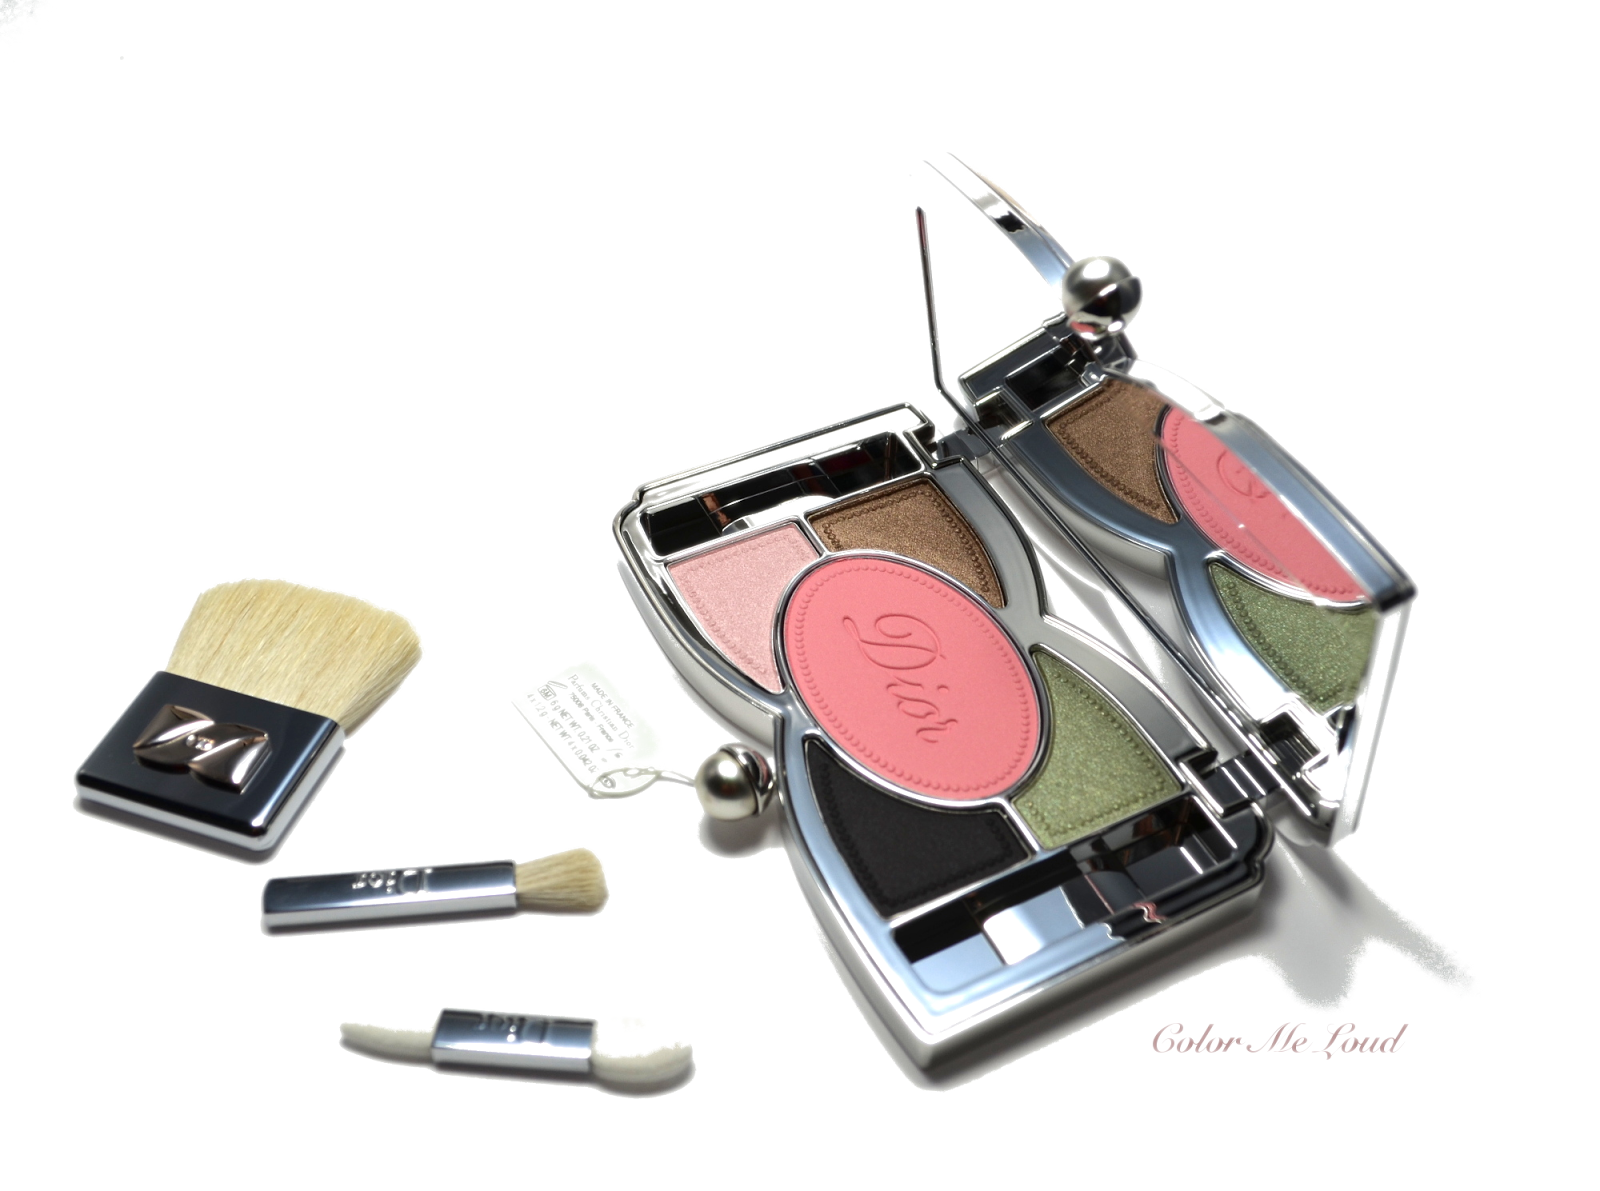 Dior Trianon Makeup Palette for Glowing Eyes & Fresh Complexion in